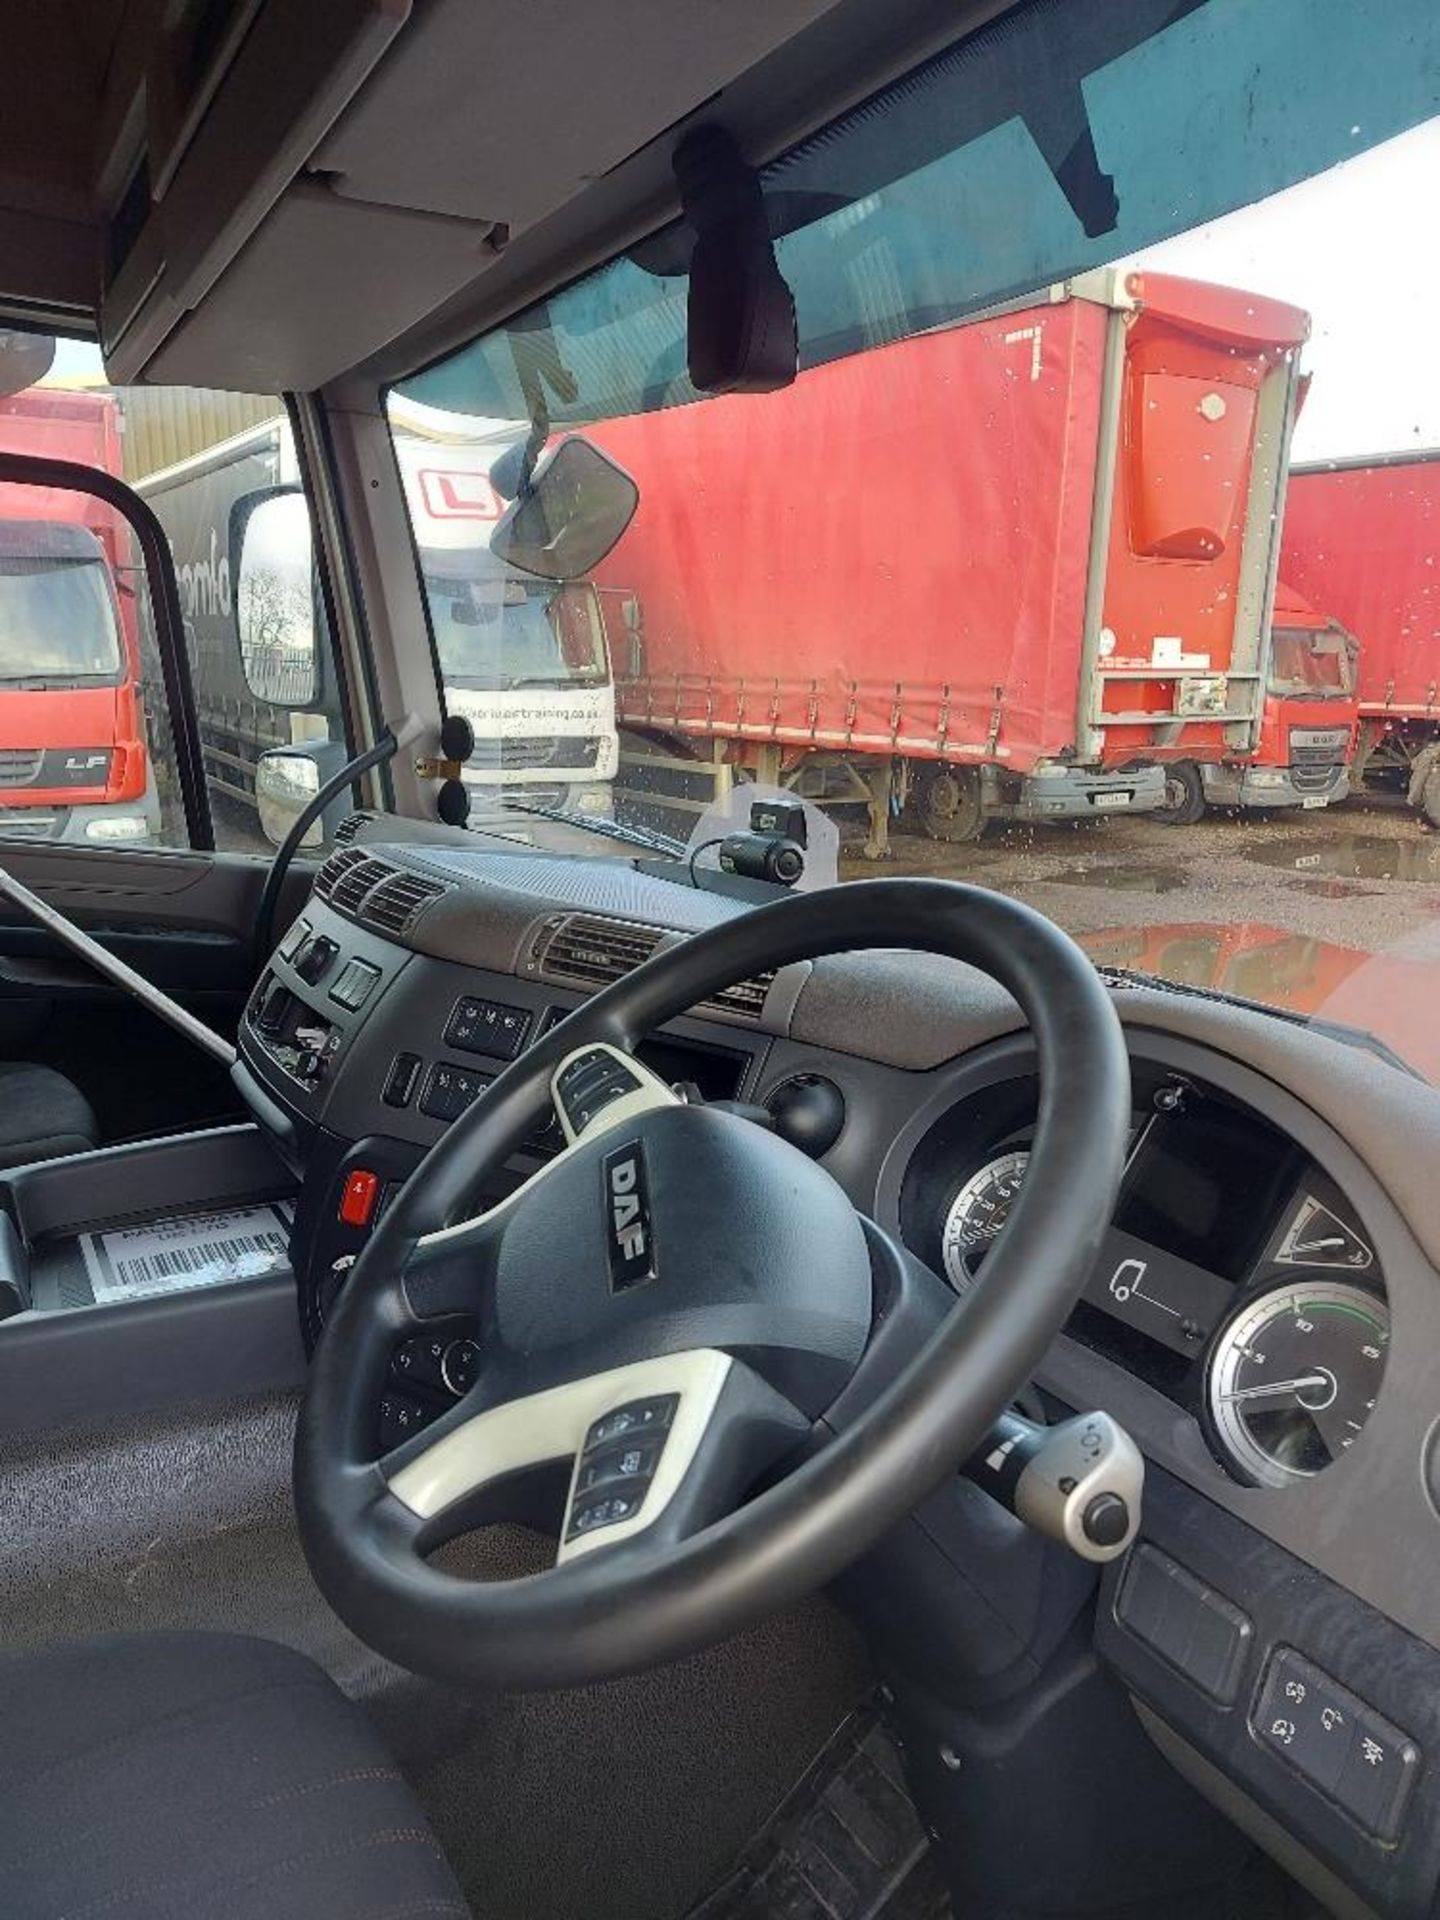 DAF CF 480 FTG Space Cab 6x2 Tractor Unit - Image 8 of 12